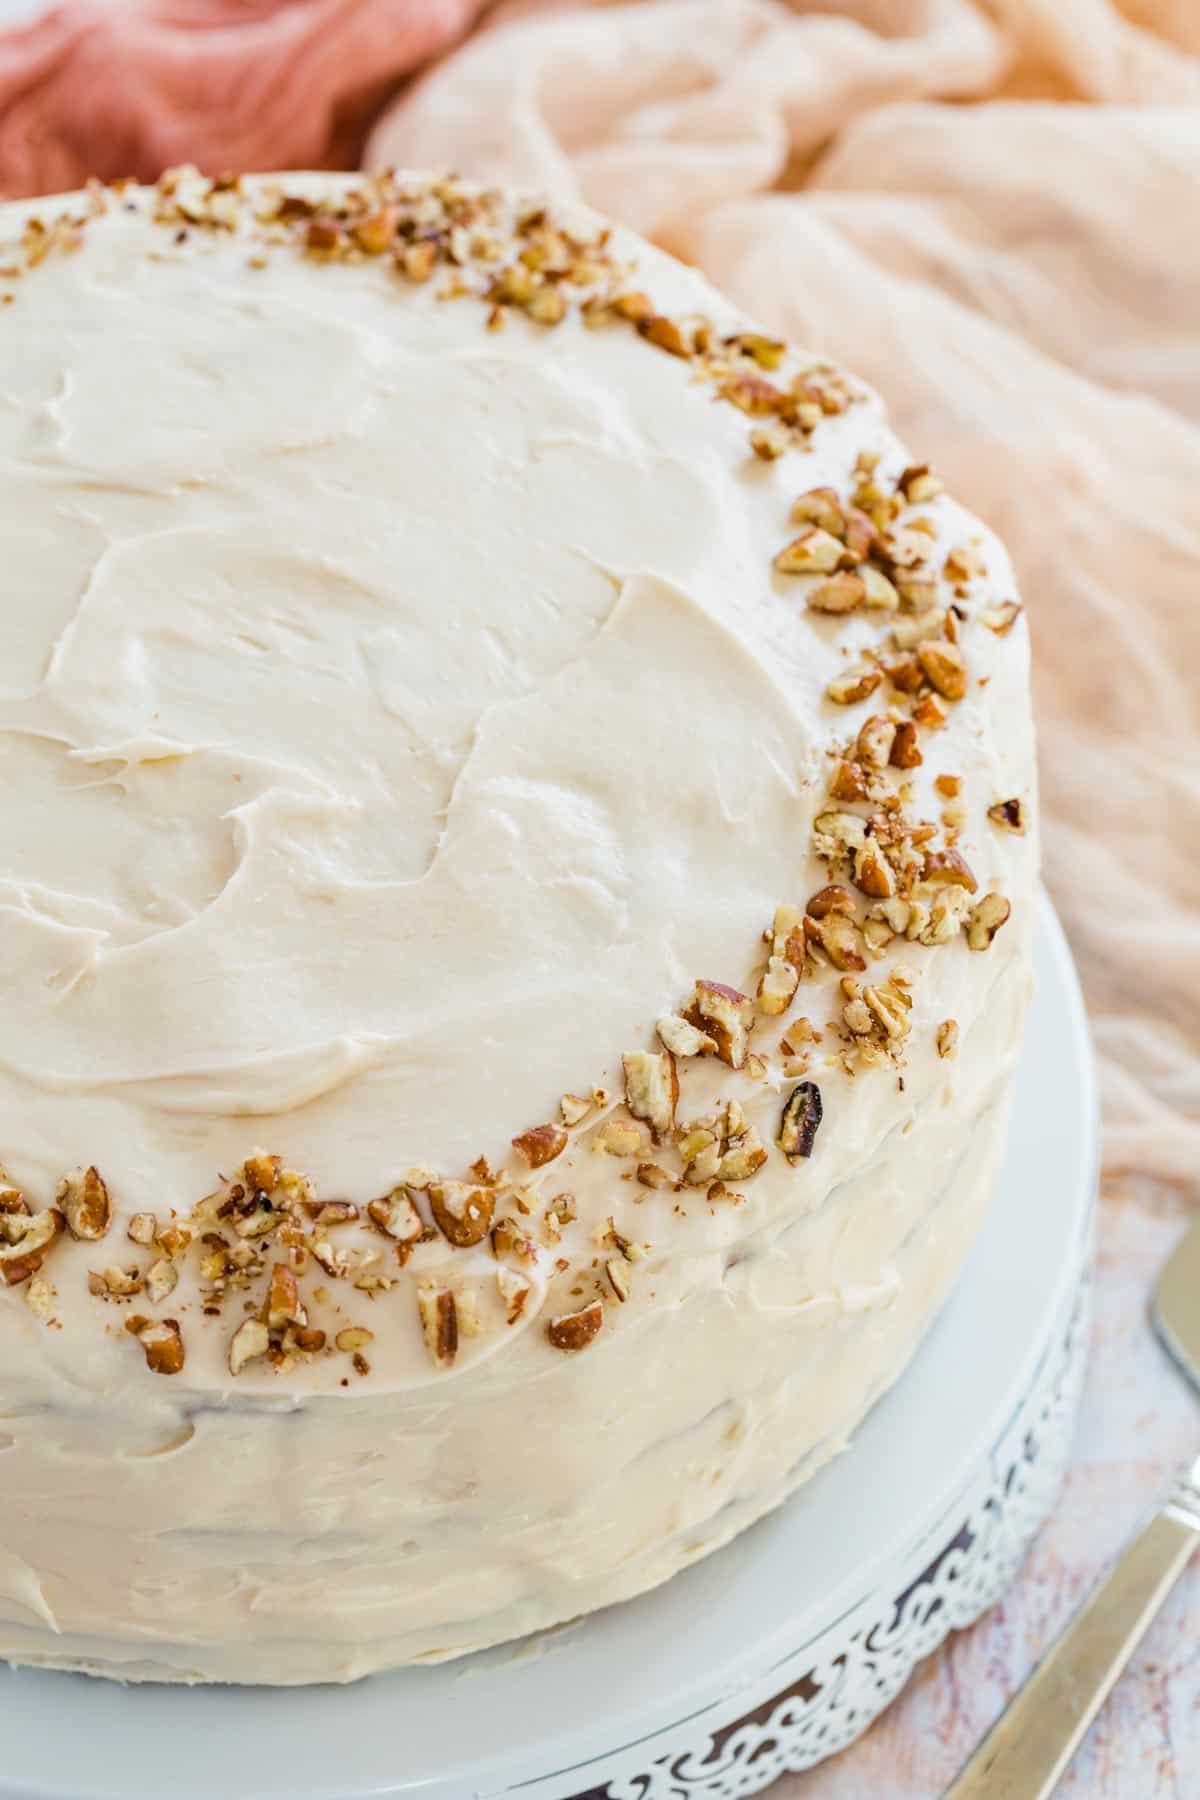 A full gluten free hummingbird cake on a plate, garnished with crushed pecans.